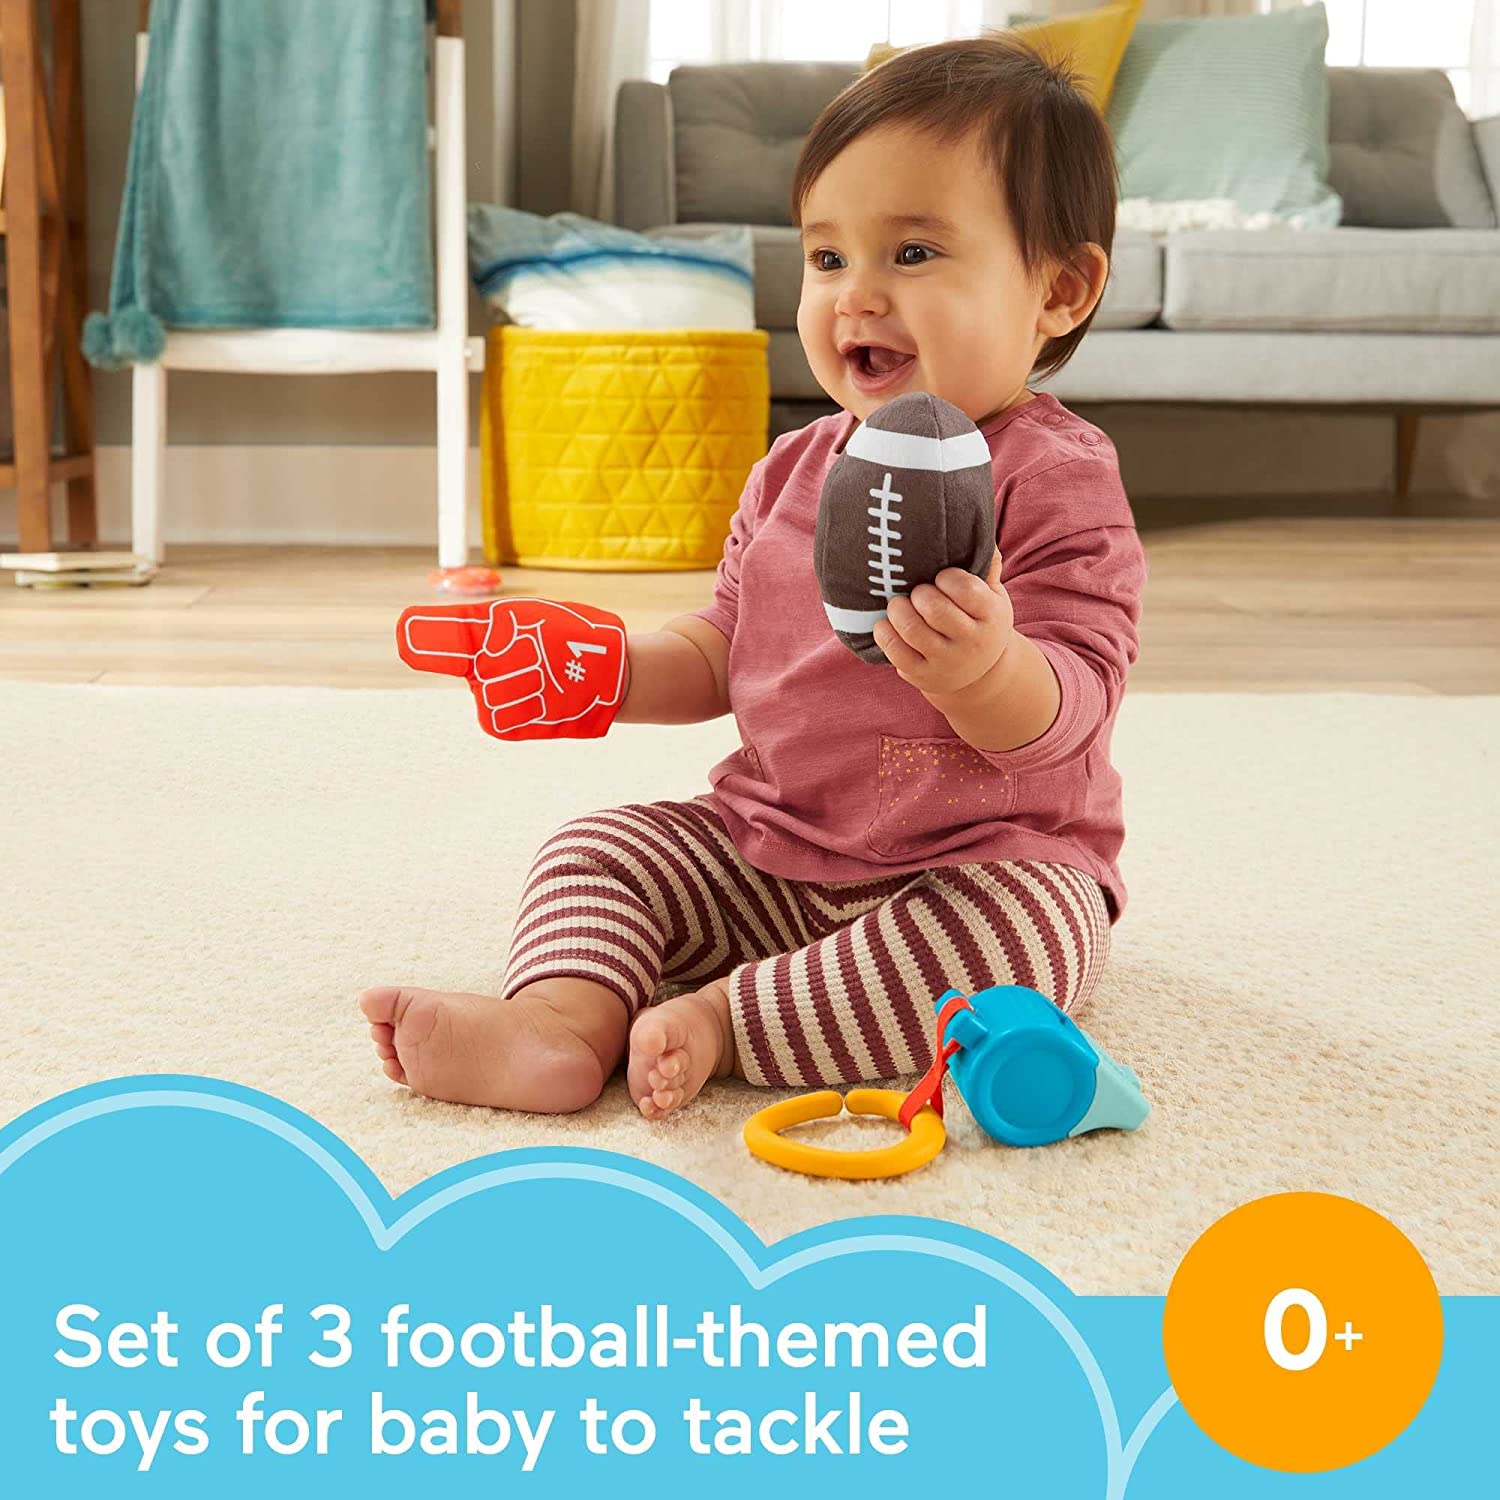 Fisher-Price Tiny Touchdowns Gift Set - Soft, BPA-free whistle teether